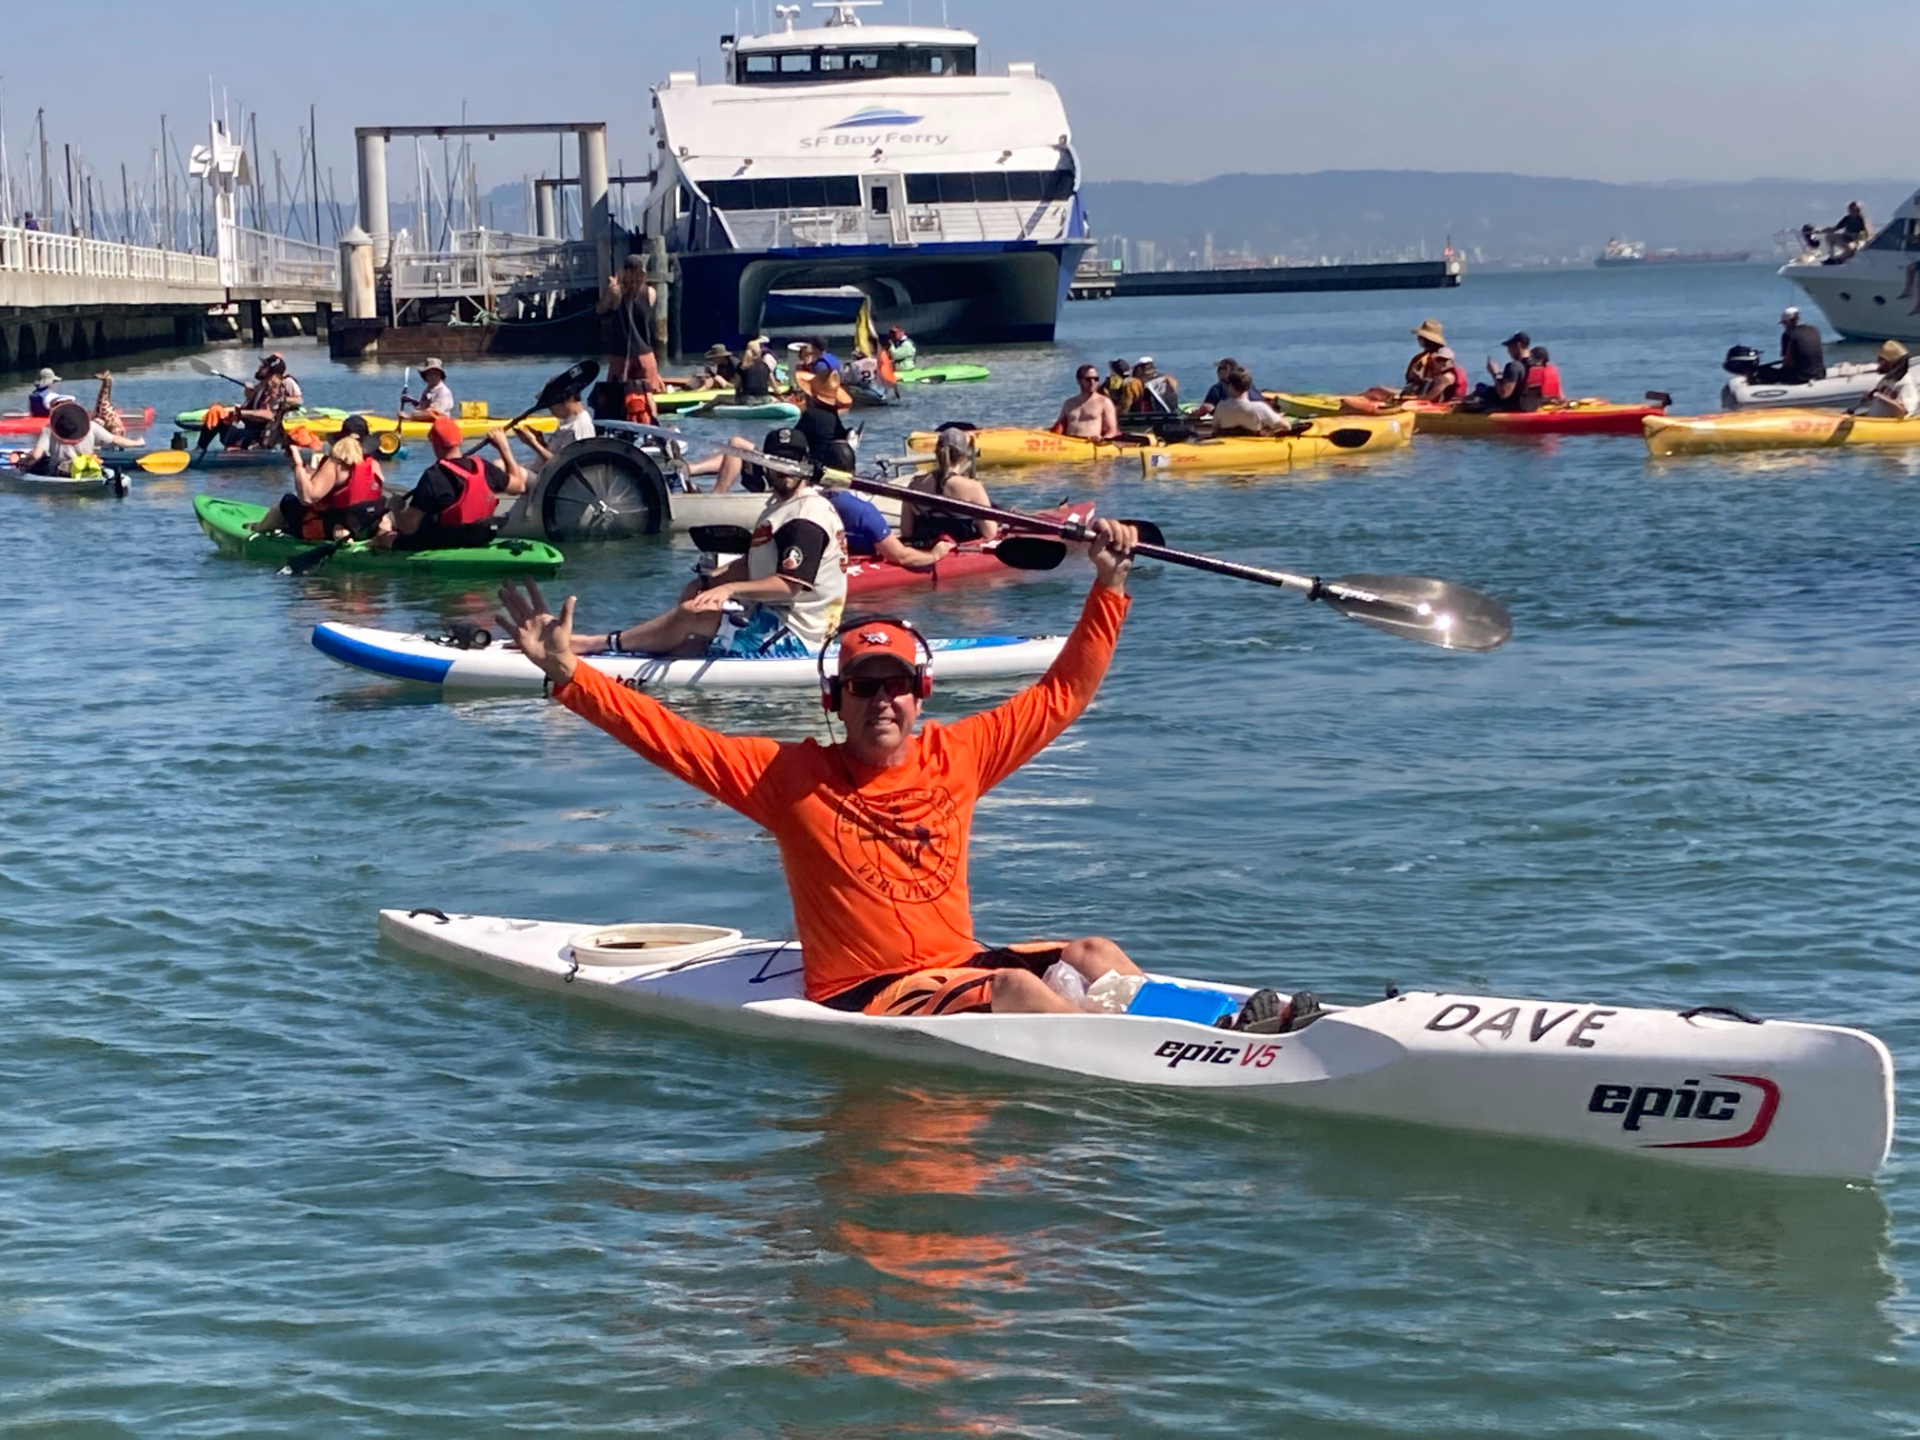 A man in an orange shirt and hat and wearing headphones holds his oar above his head triumphantly while sitting atop a white kayak in San Francisco Bay, surrounded by other boaters.